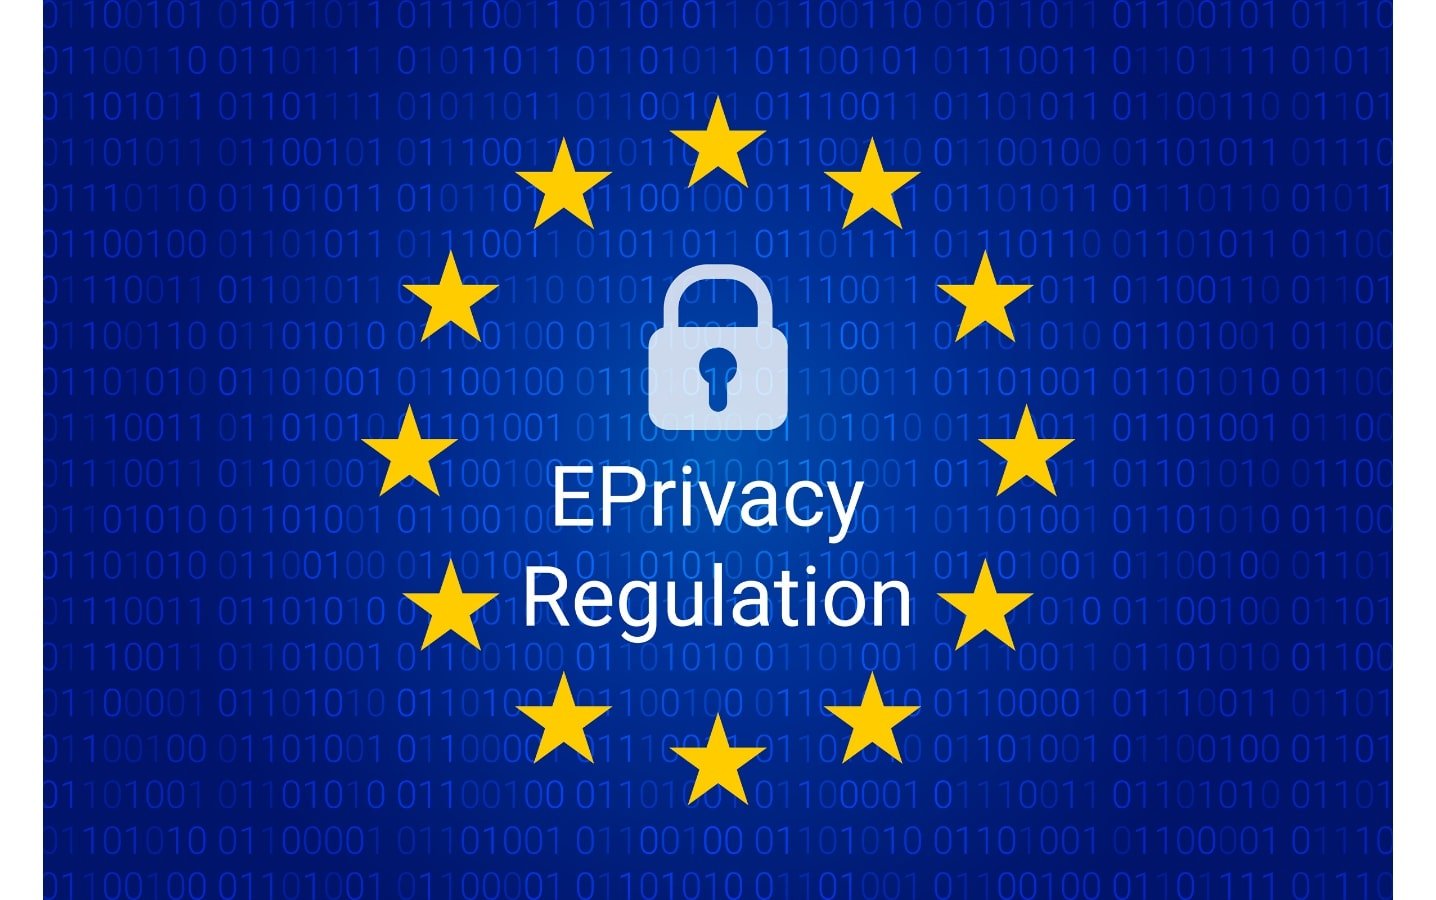 ePrivacy Regulation ePR The EU Cookie Law 12 stars create a circle around the logo